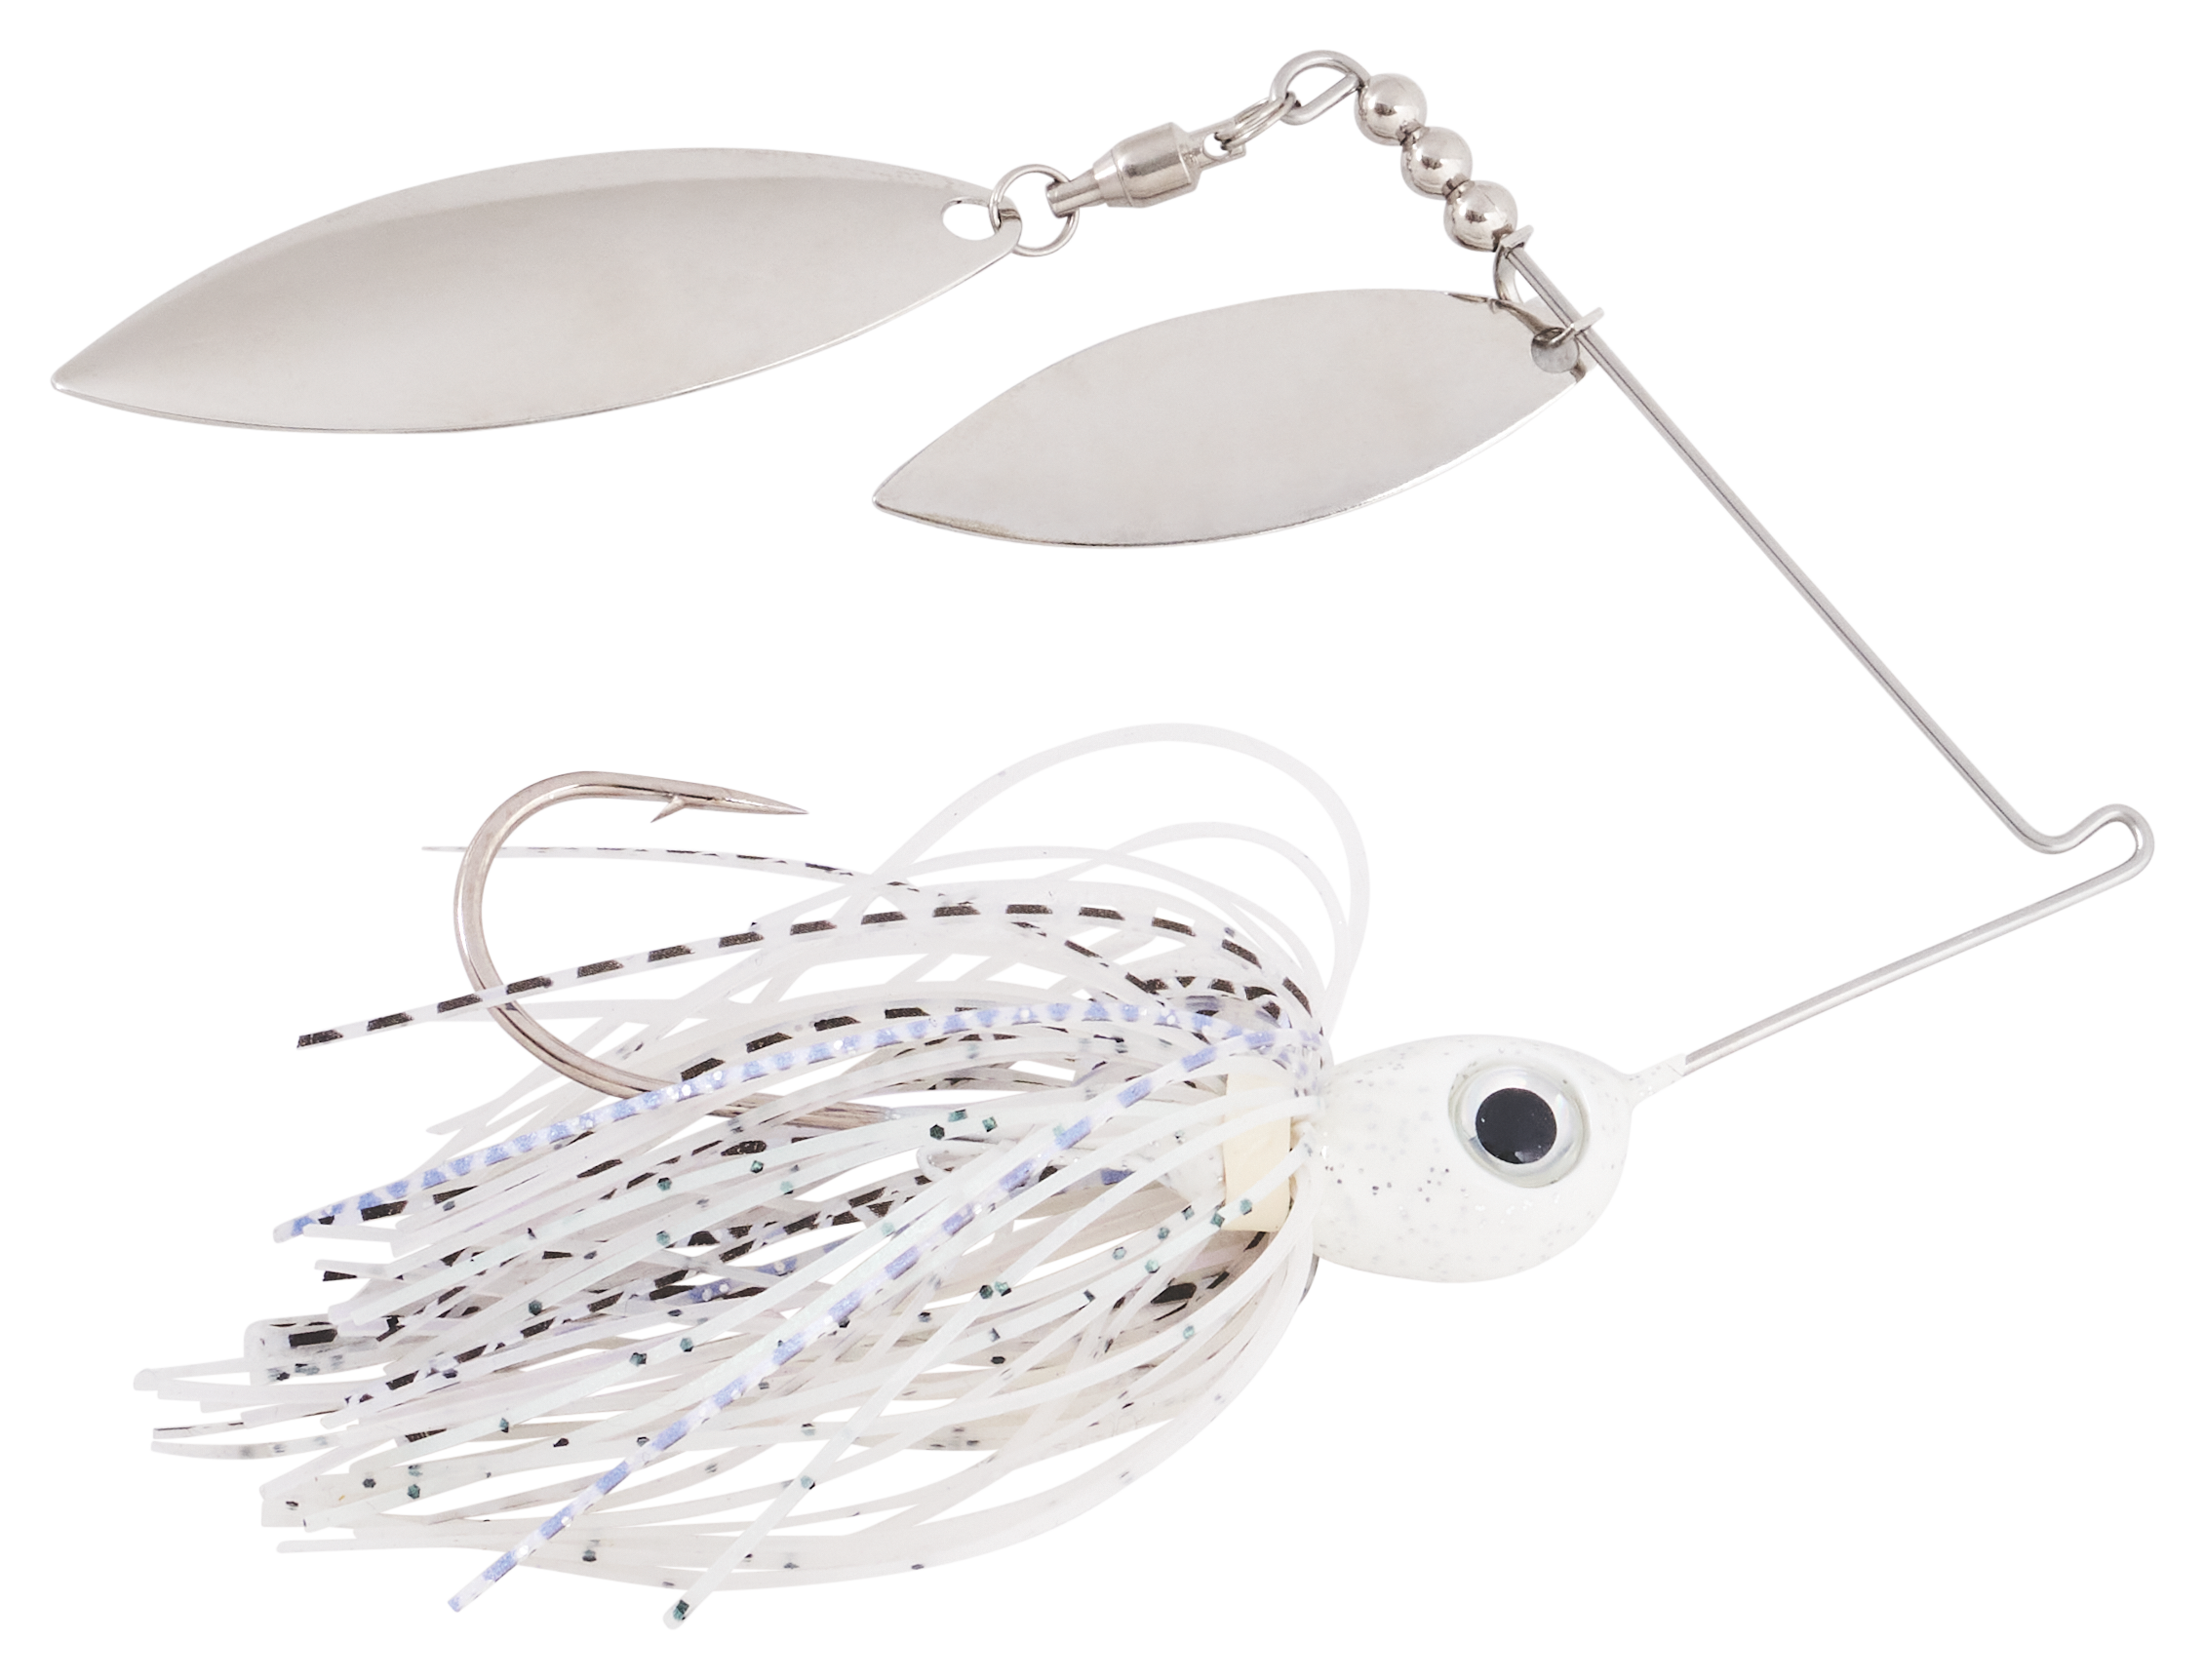 Bass Pro Shops XPS All-American Double-Willow Spinnerbait - White-Nickel - 3/8 oz.